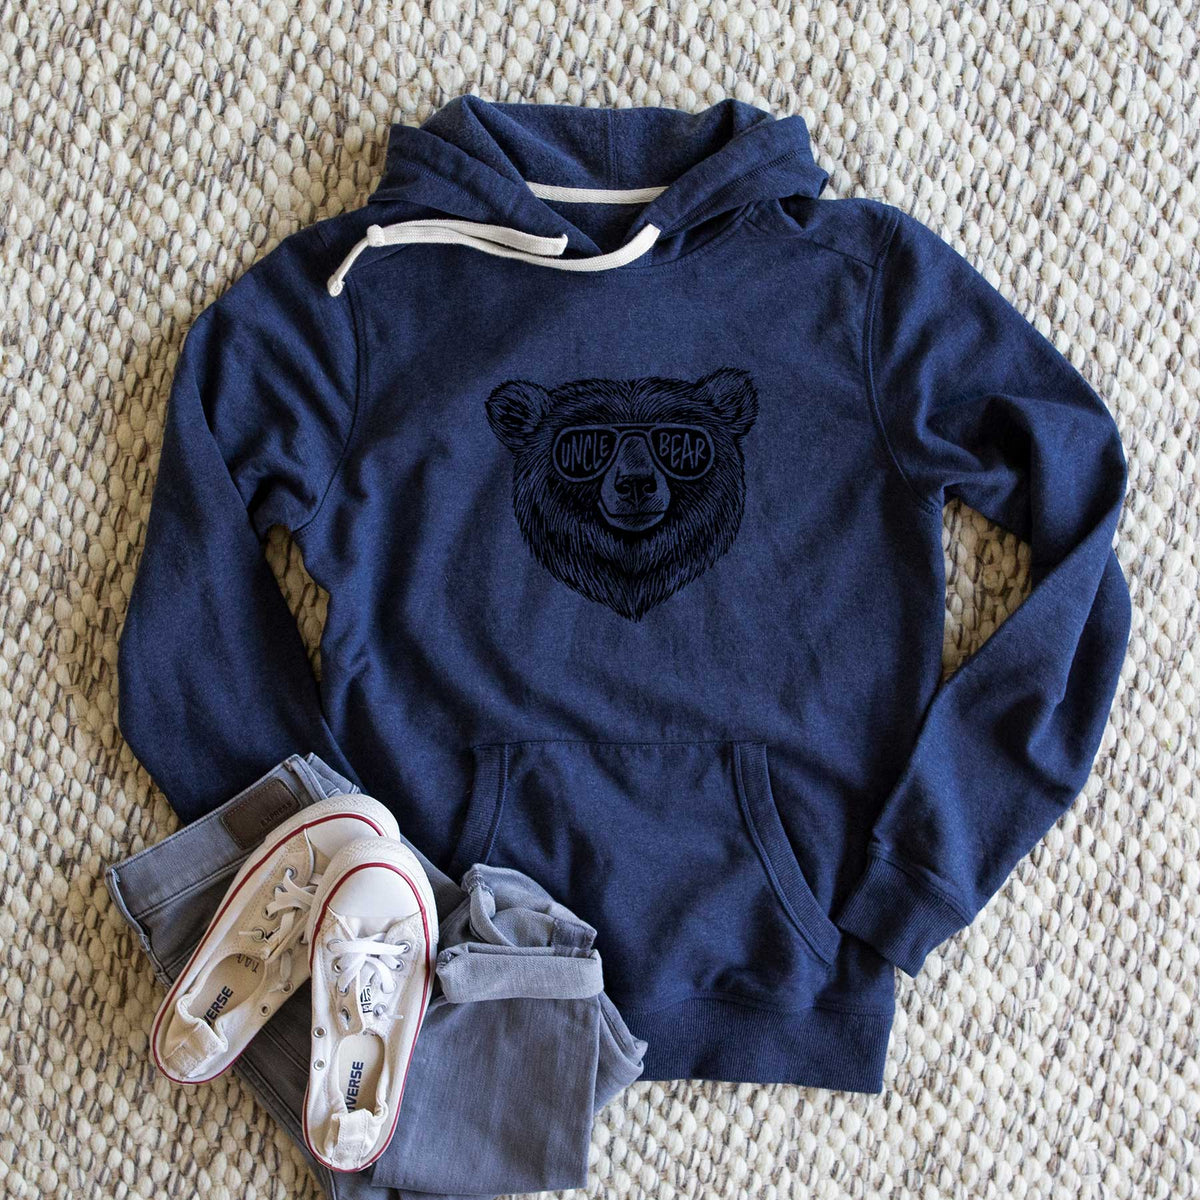 Uncle Bear - Unisex Recycled Hoodie - CLOSEOUT - FINAL SALE